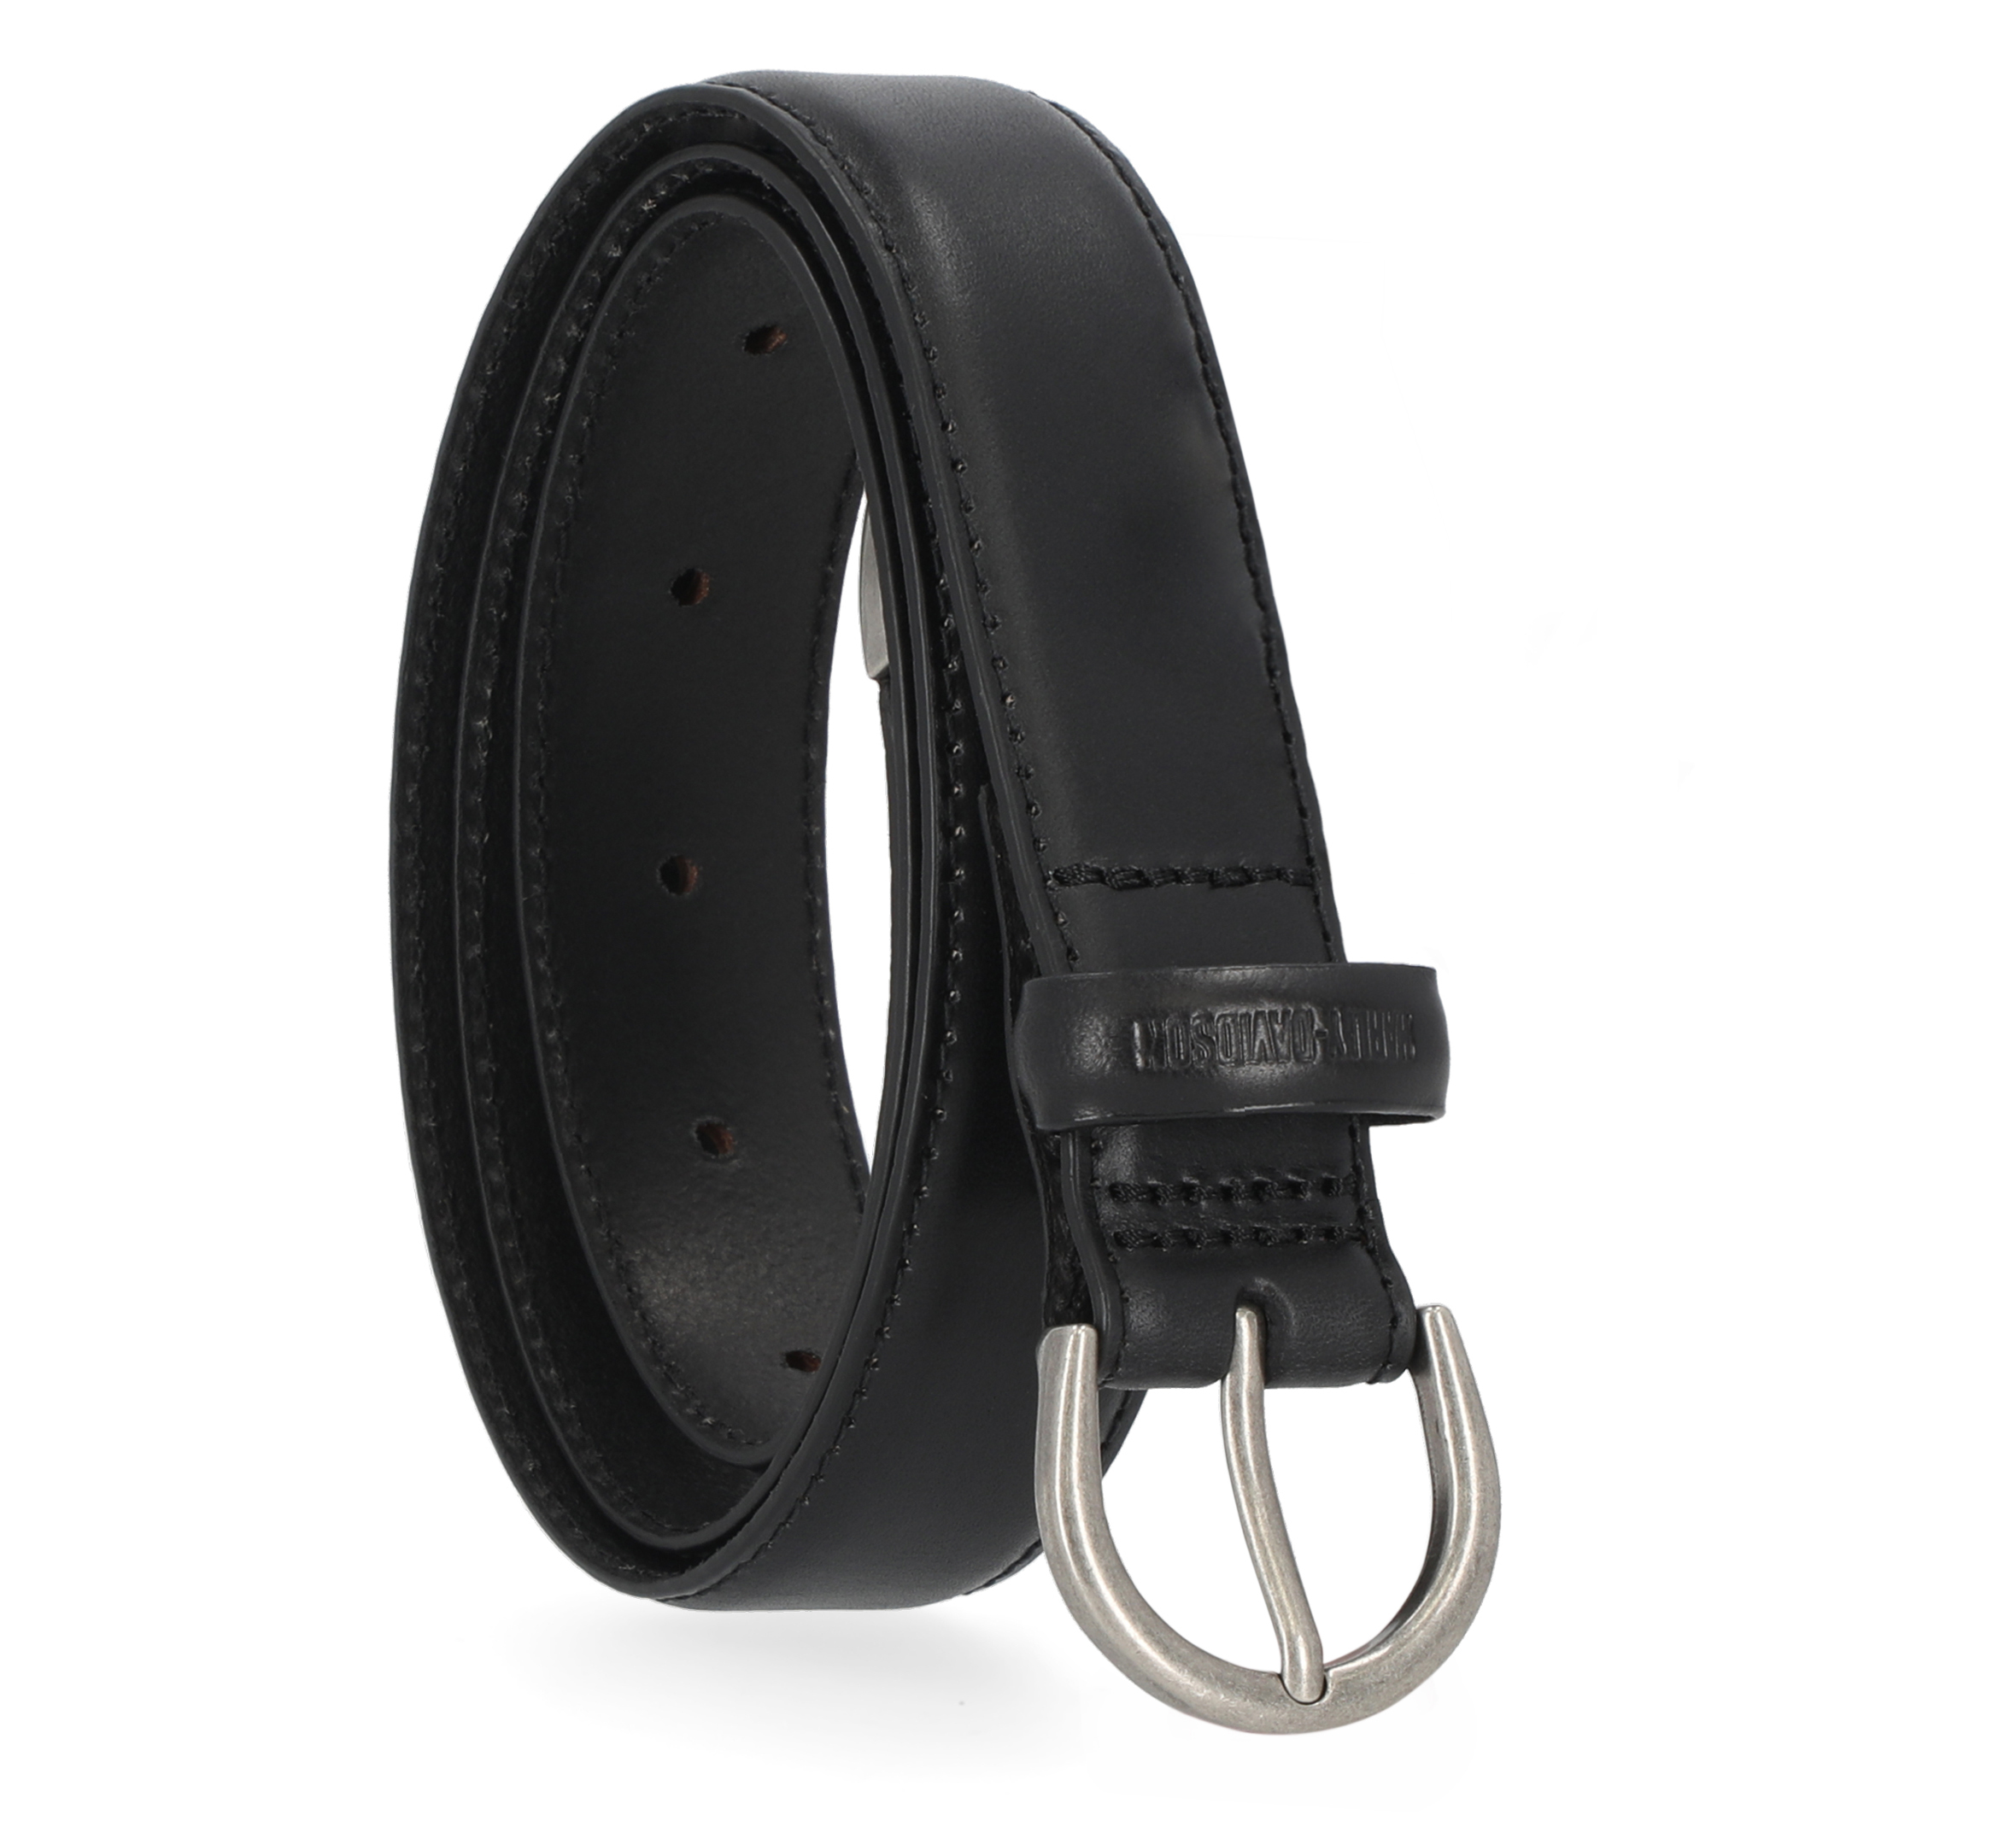 Replacement leather belts tailored to customers' Ferragamo buckles